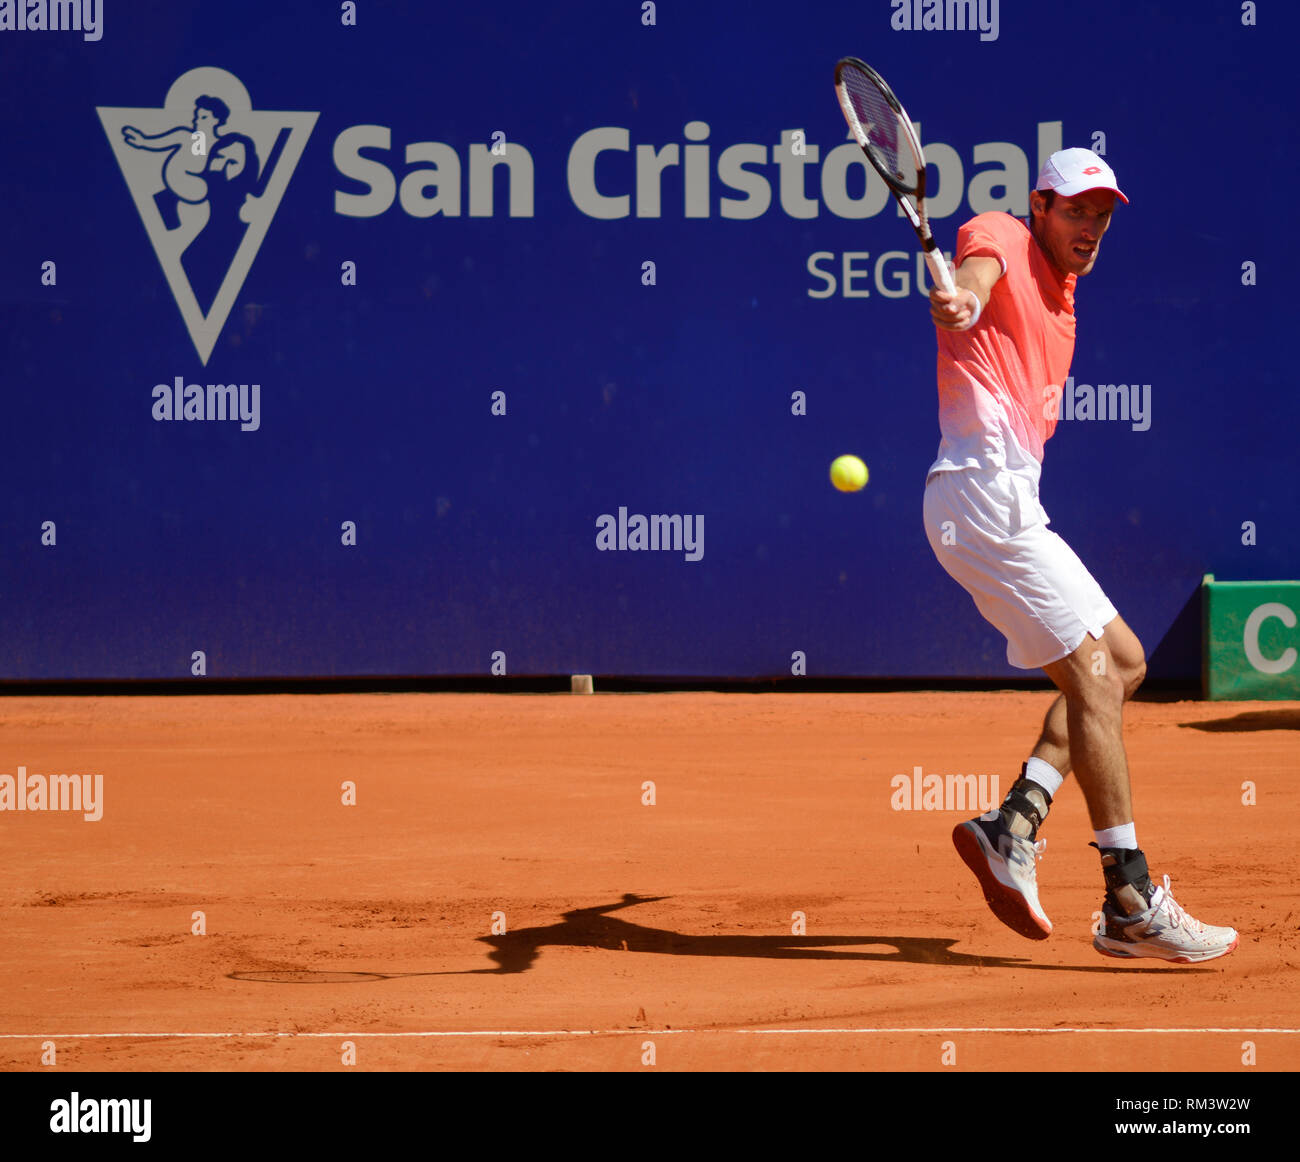 Buenos Aires, Argentina. 12th Feb 2019. Leonardo Mayer (Argentina) defeated Dusan Lajovic (Serbia) and advances to the second round of the Argentina Open, an ATP 250 tennis tournament Credit: Mariano Garcia/Alamy Live News Stock Photo